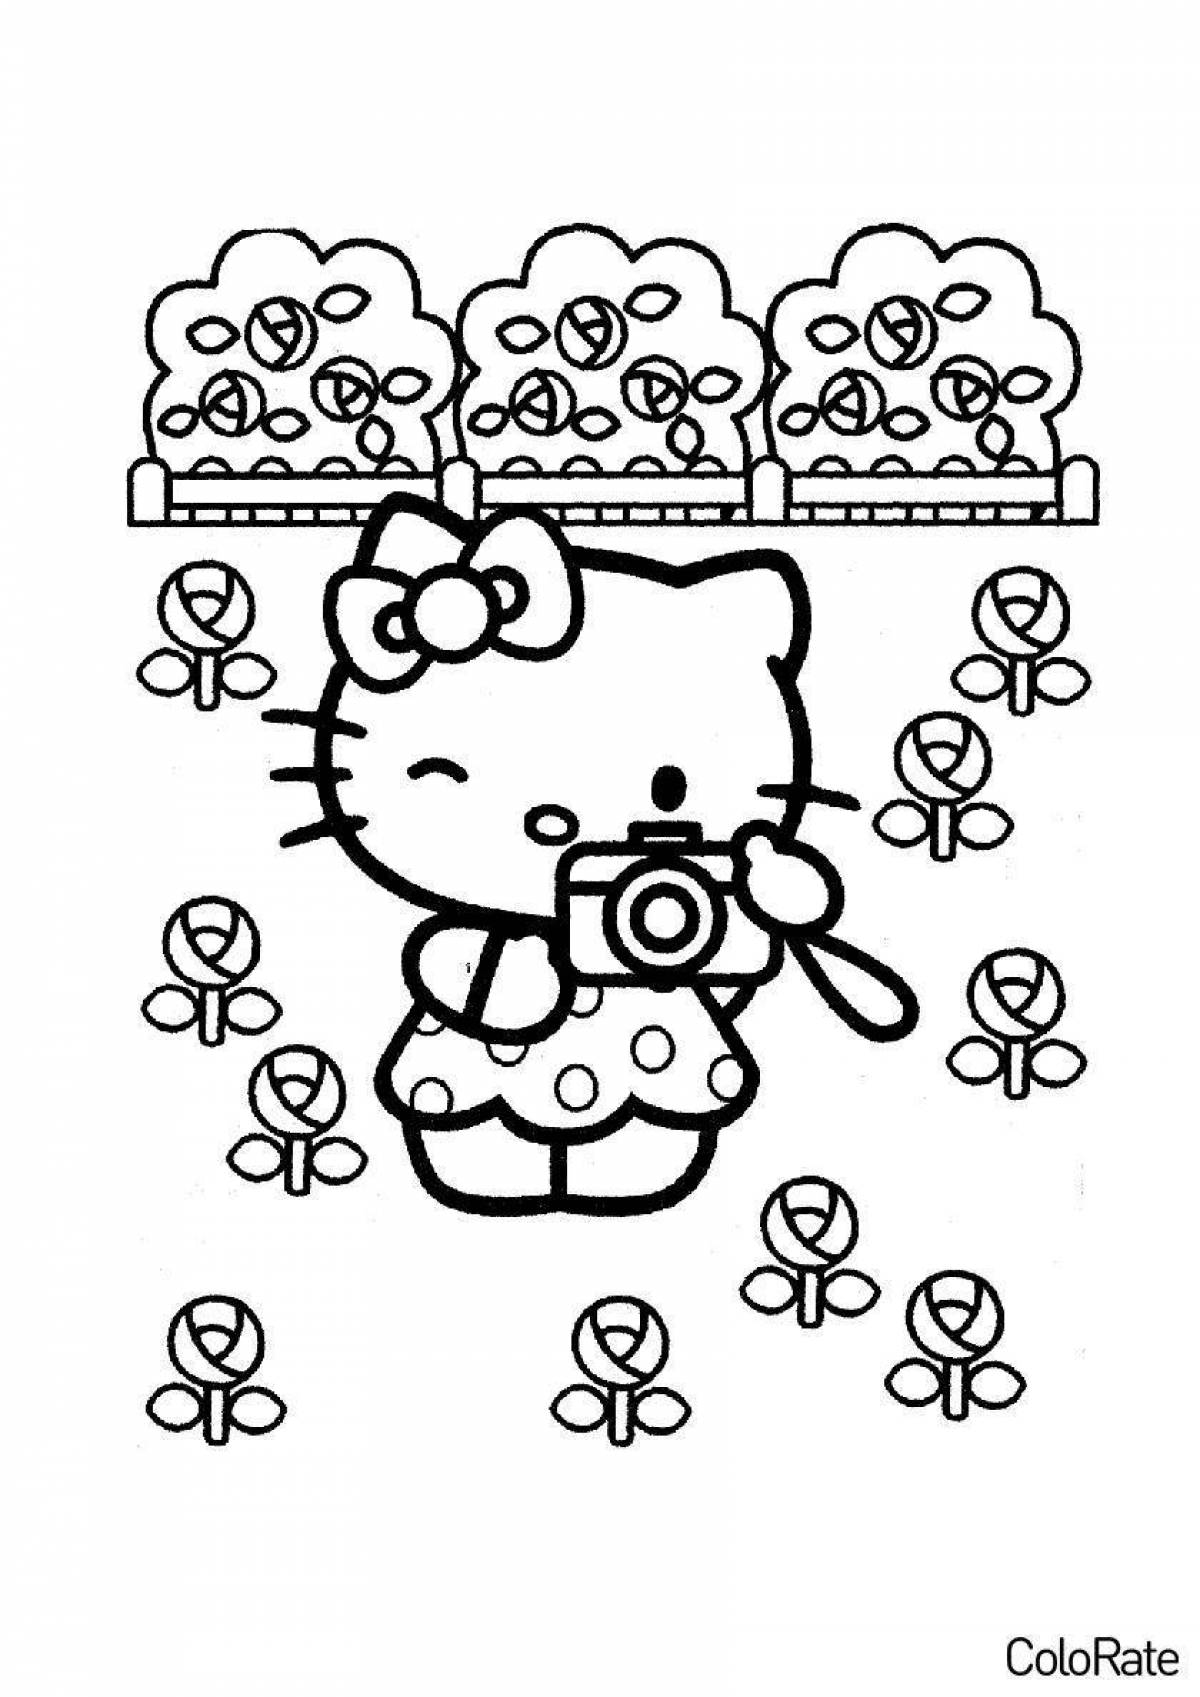 Adorable hello kitty mermaid coloring page